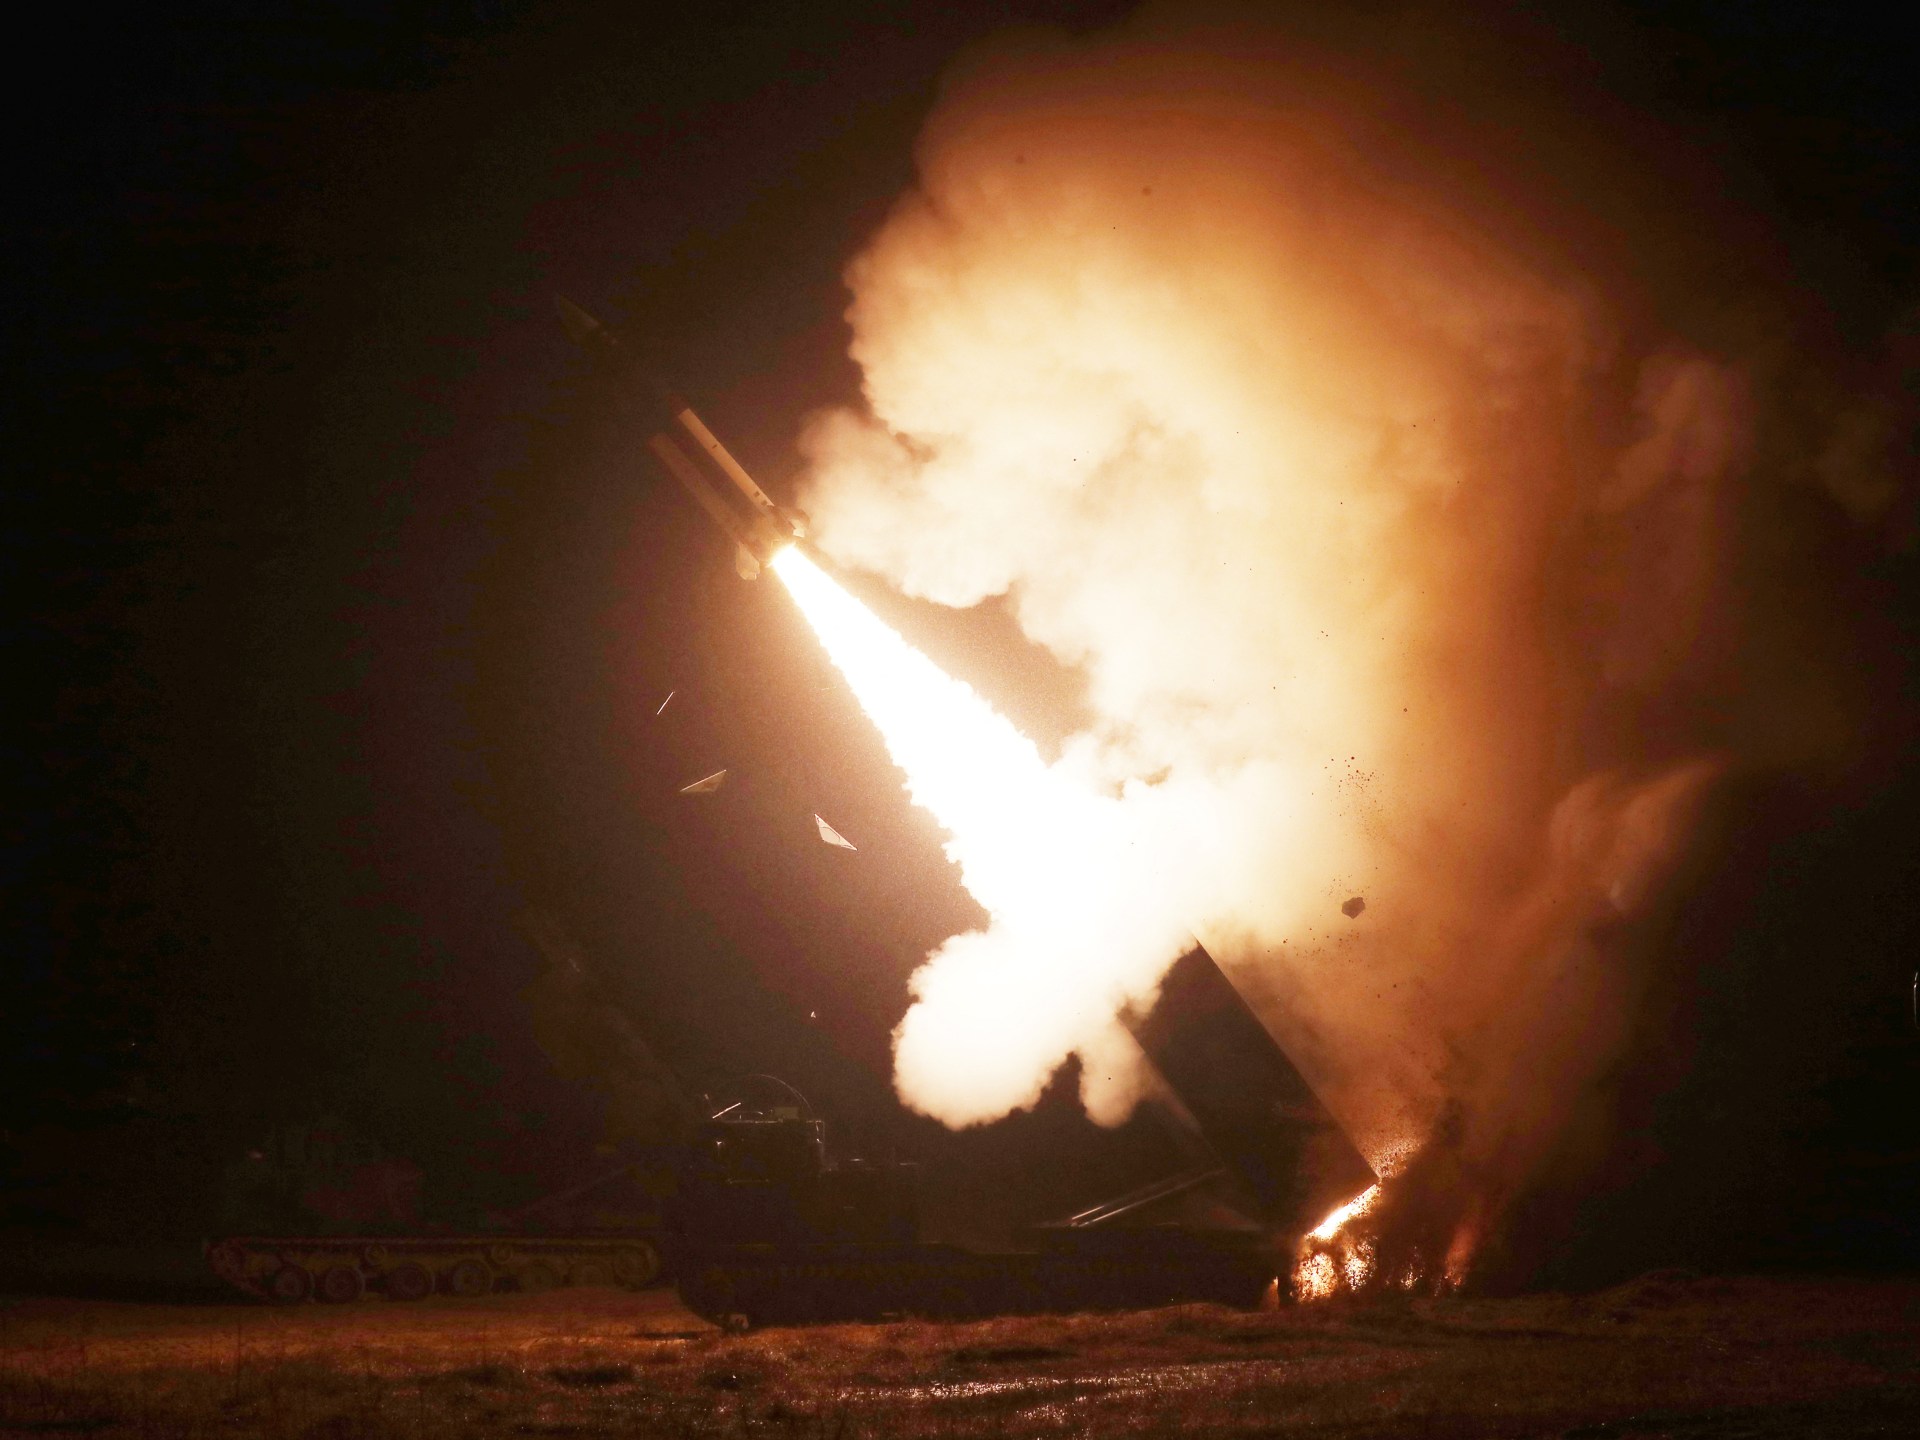 US, South Korea fire weapons after North Korea missile launch